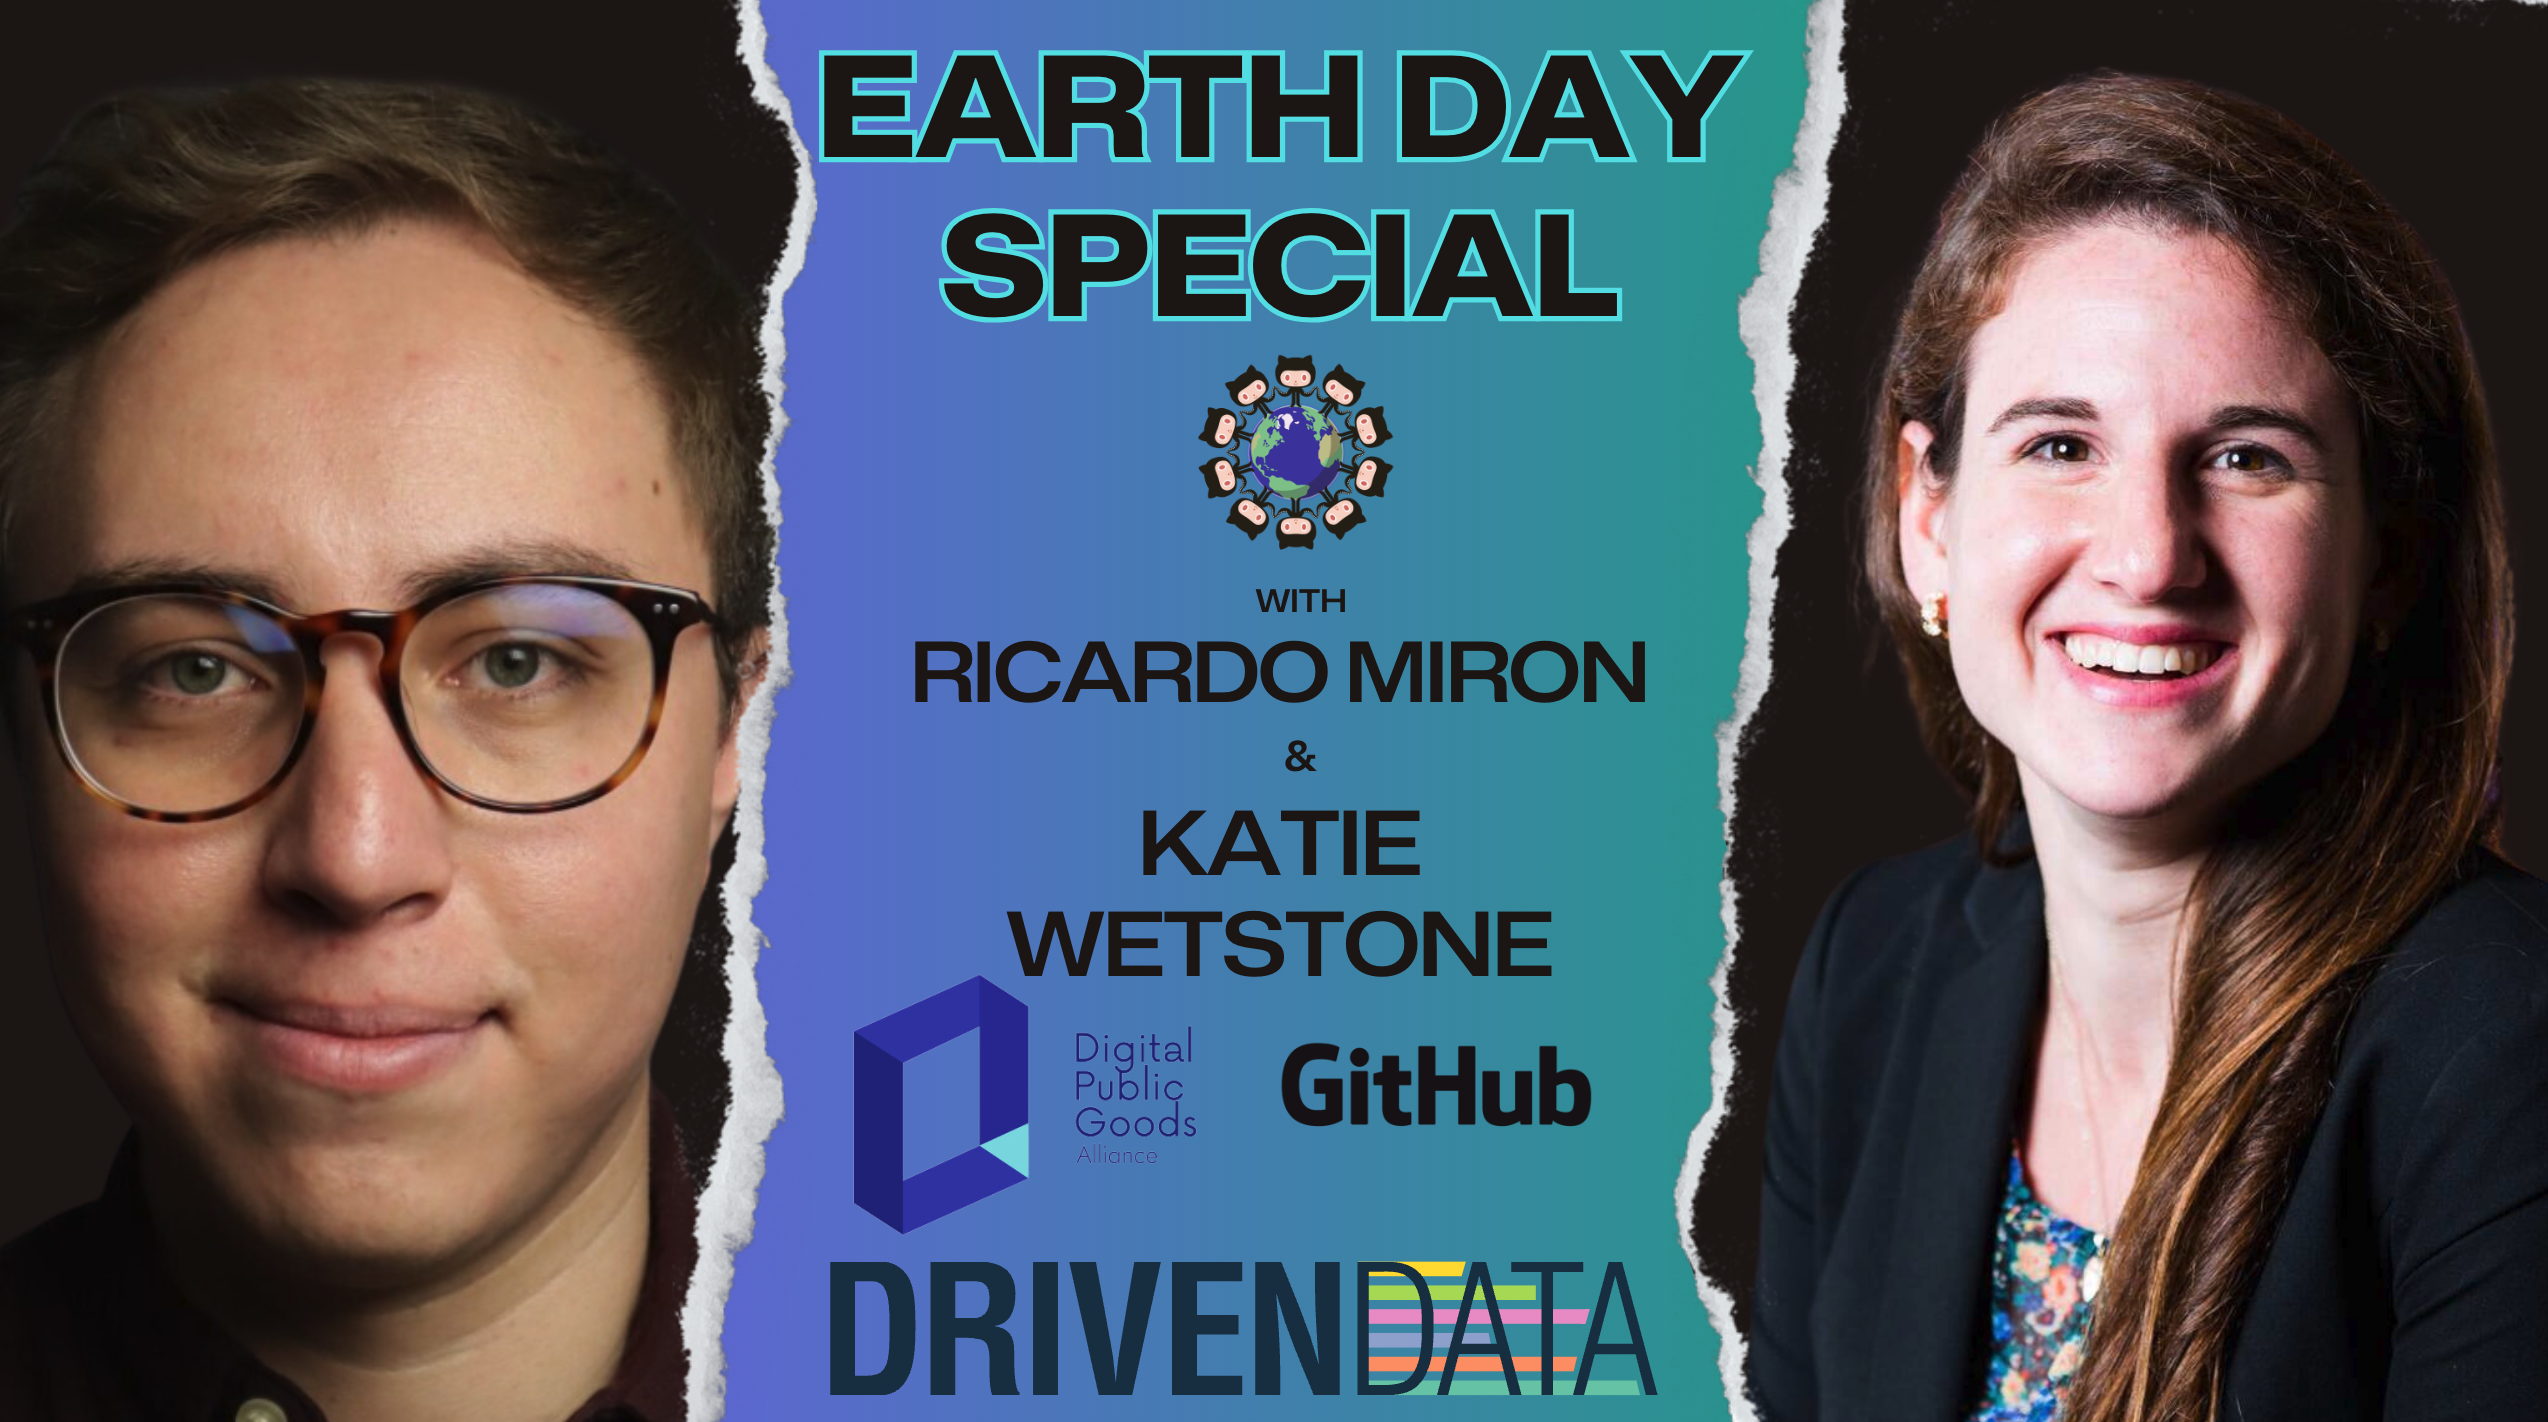 Earth Day Special with Ricardo Miron and Katie Wetstone